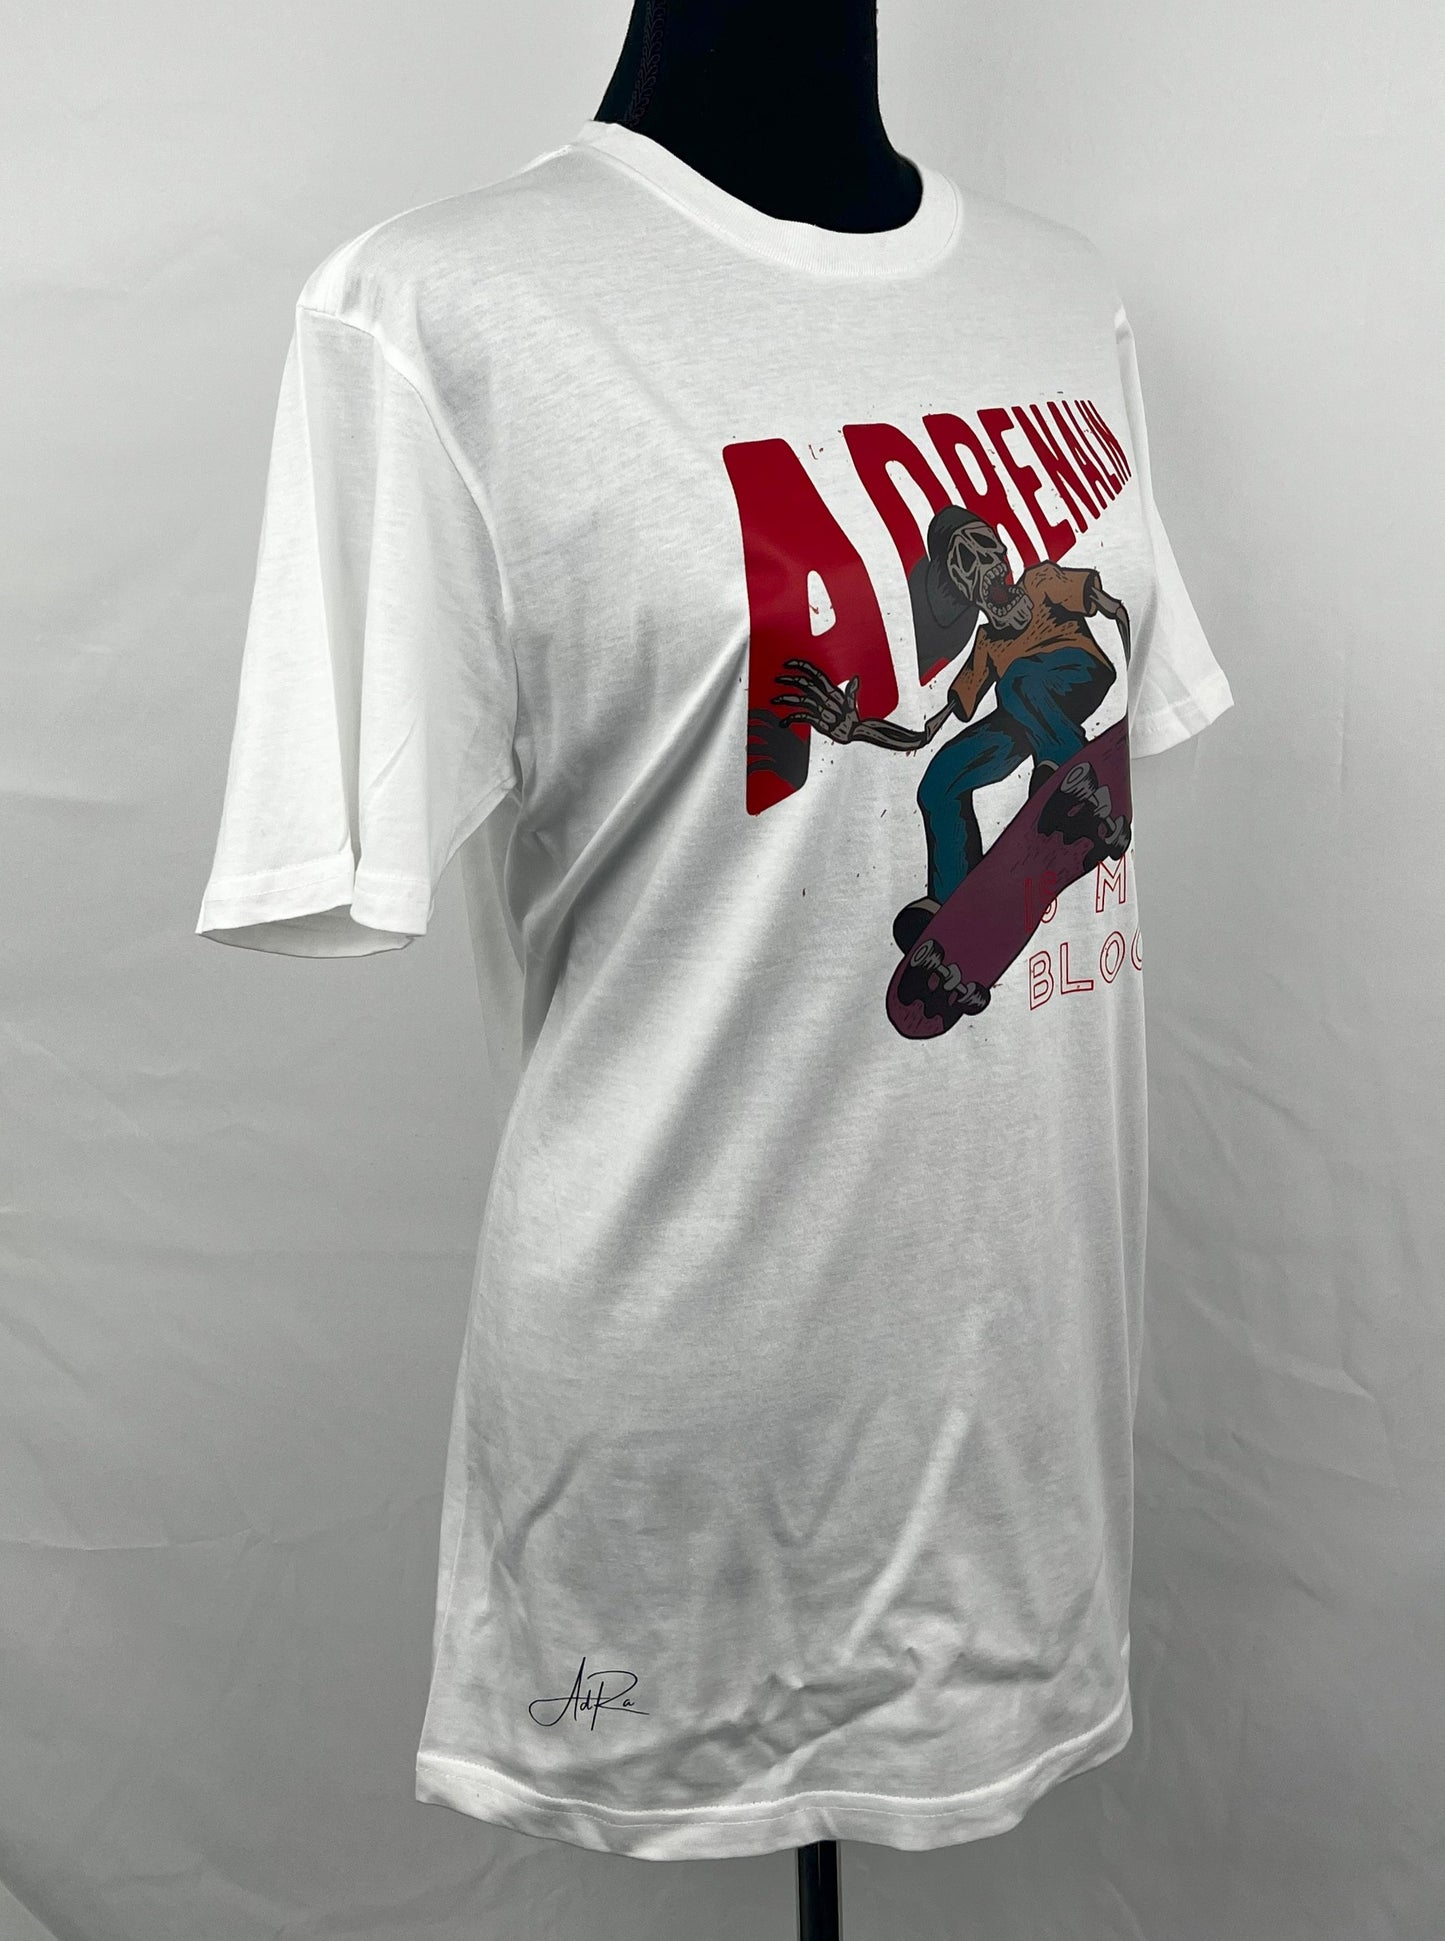 Adrenaline is My Blood - Extreme Sports T-shirt – Adra Apparel